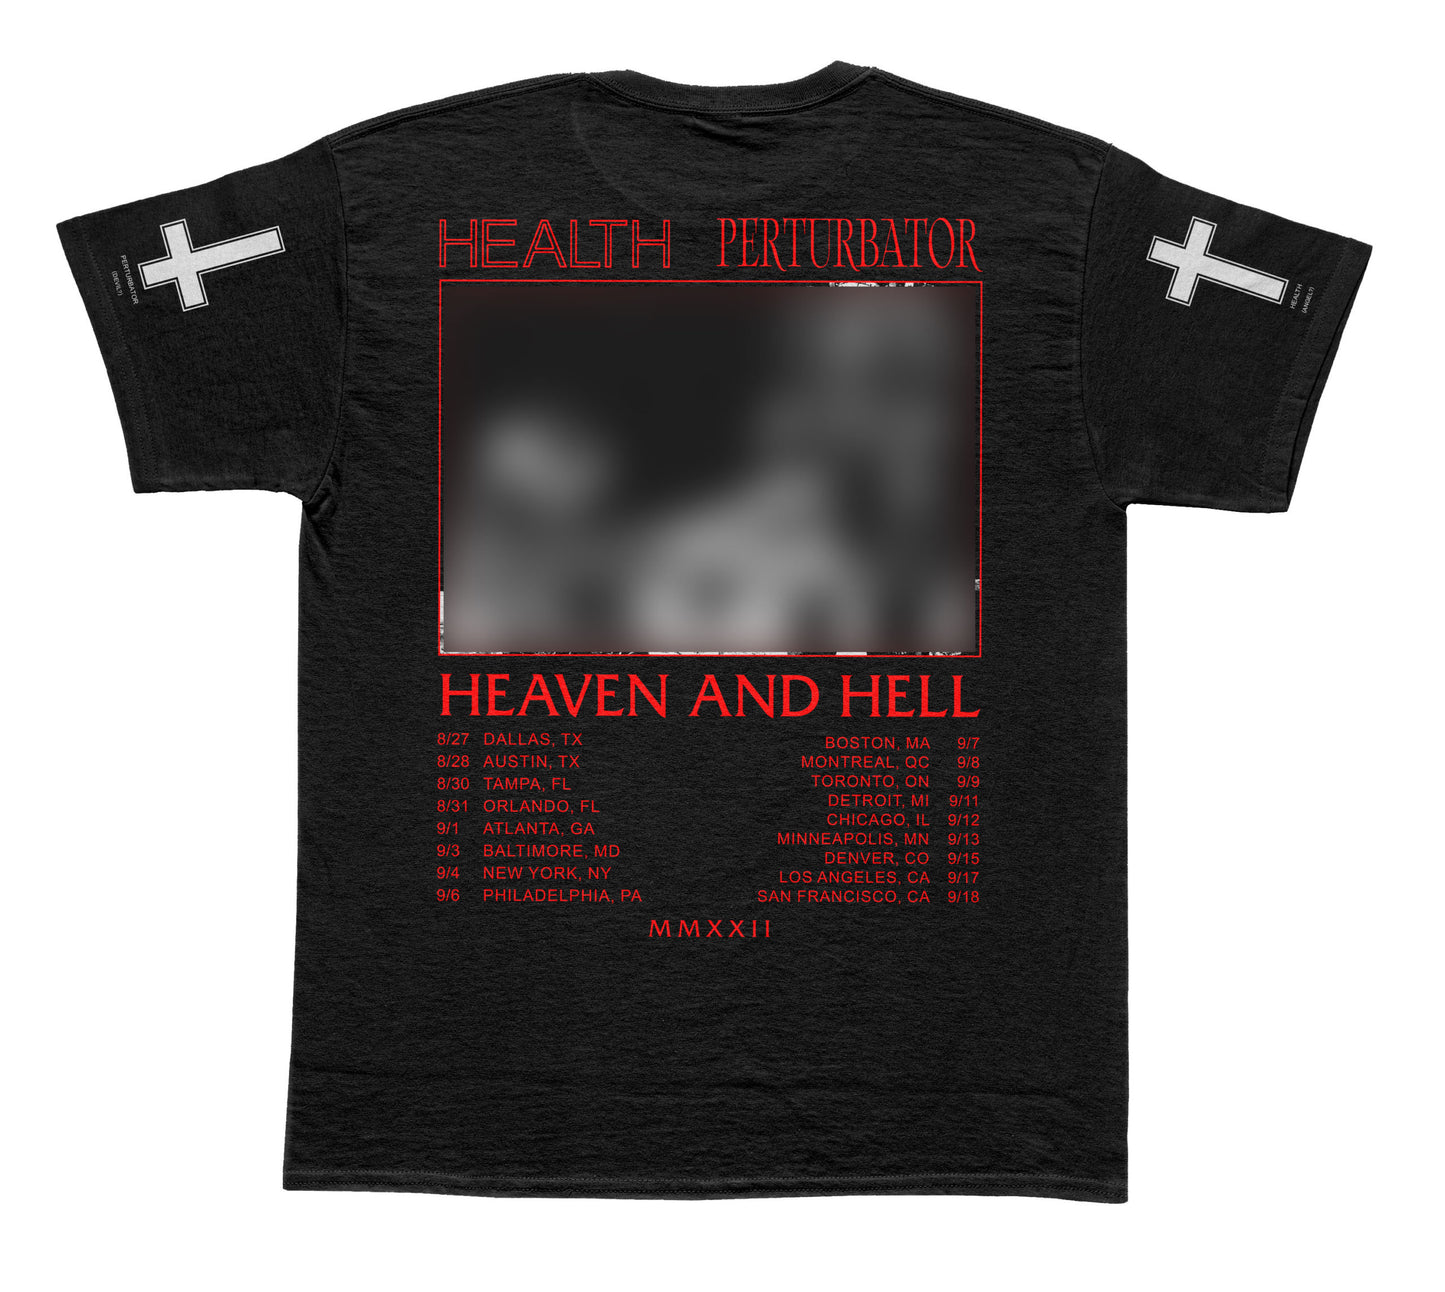 HEAVEN AND HELL 2022 TOUR TSHIRT